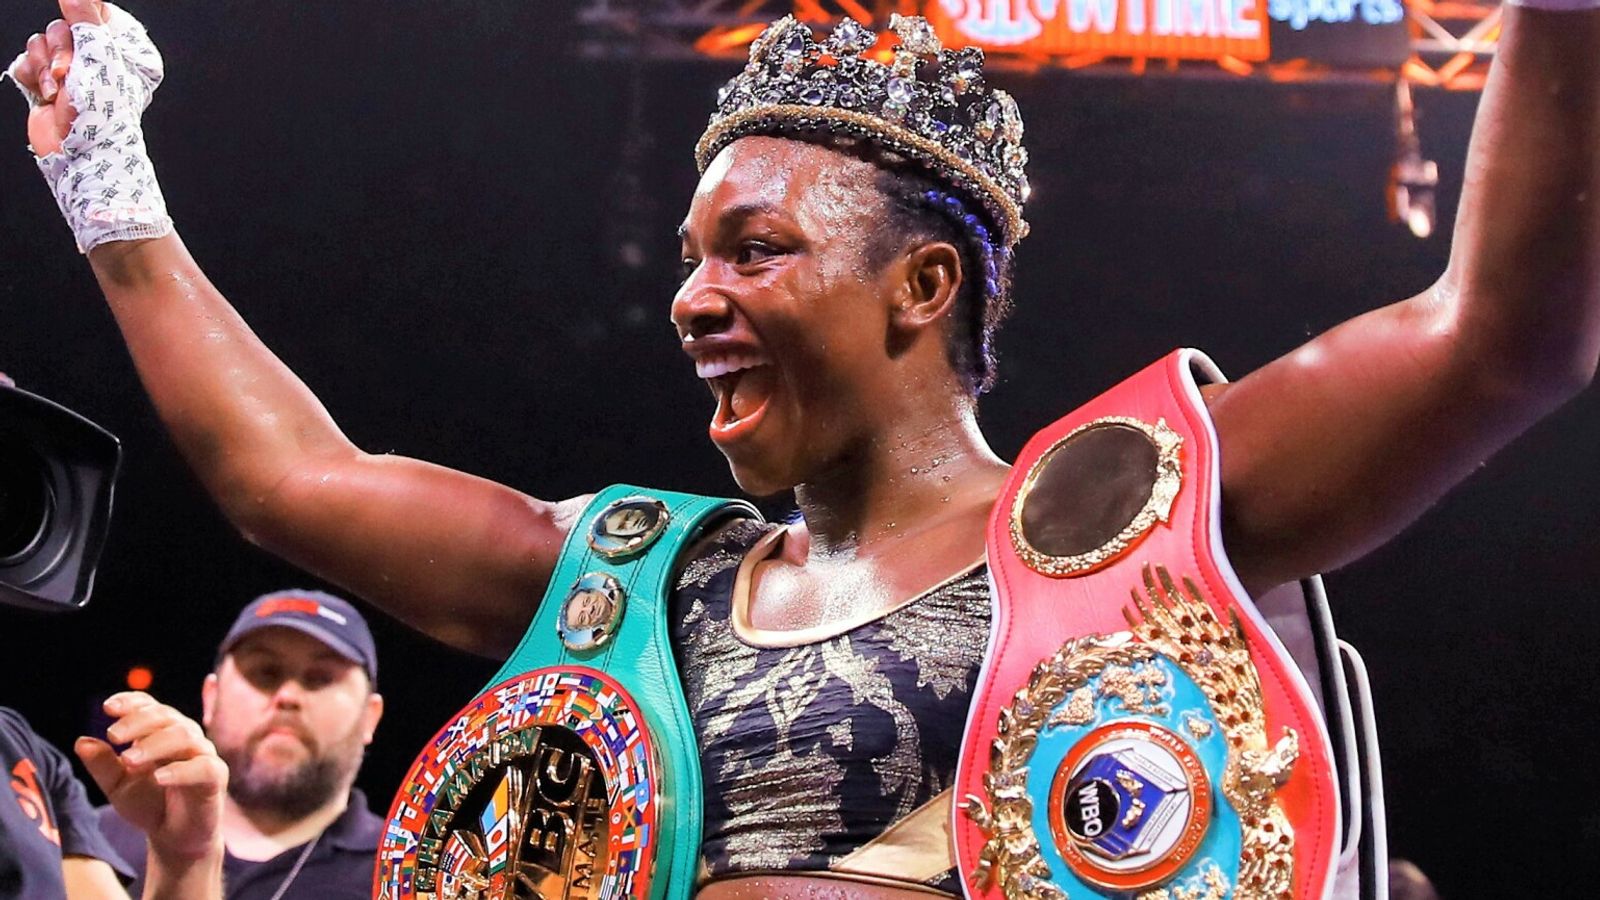 Claressa Shields superhero fight against Katie Taylor could happen, says American star promoter Dmitriy Salita |  Boxing news